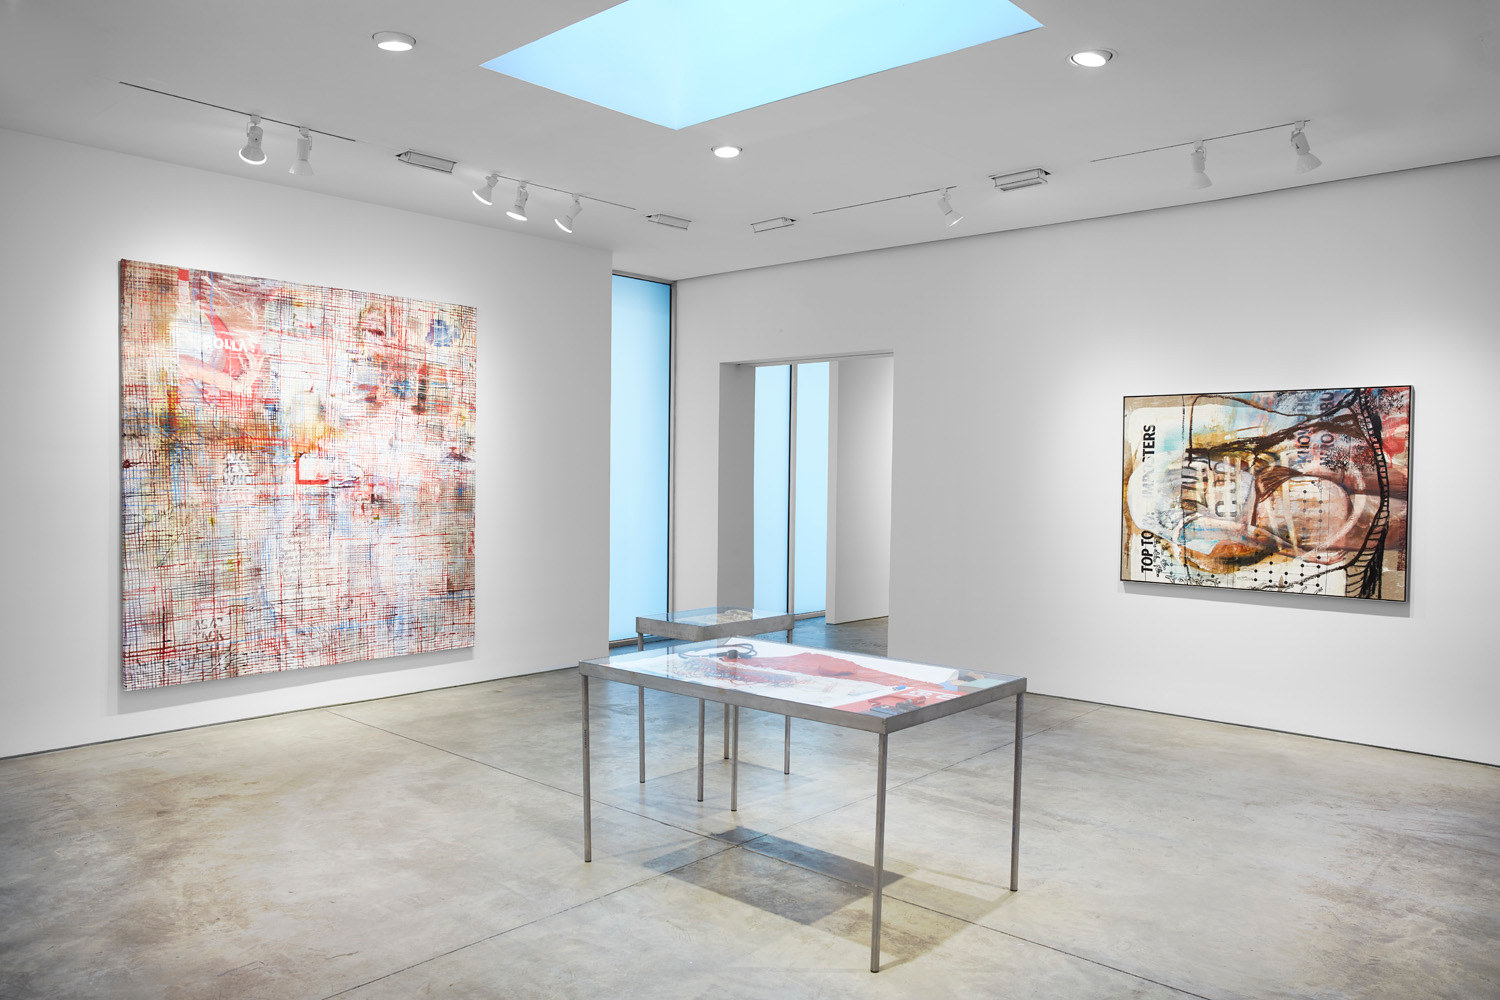 Mandy El-Sayegh,&nbsp;MUTATIONS IN BLUE, WHITE AND RED, Installation view at Lehmann Maupin, New York